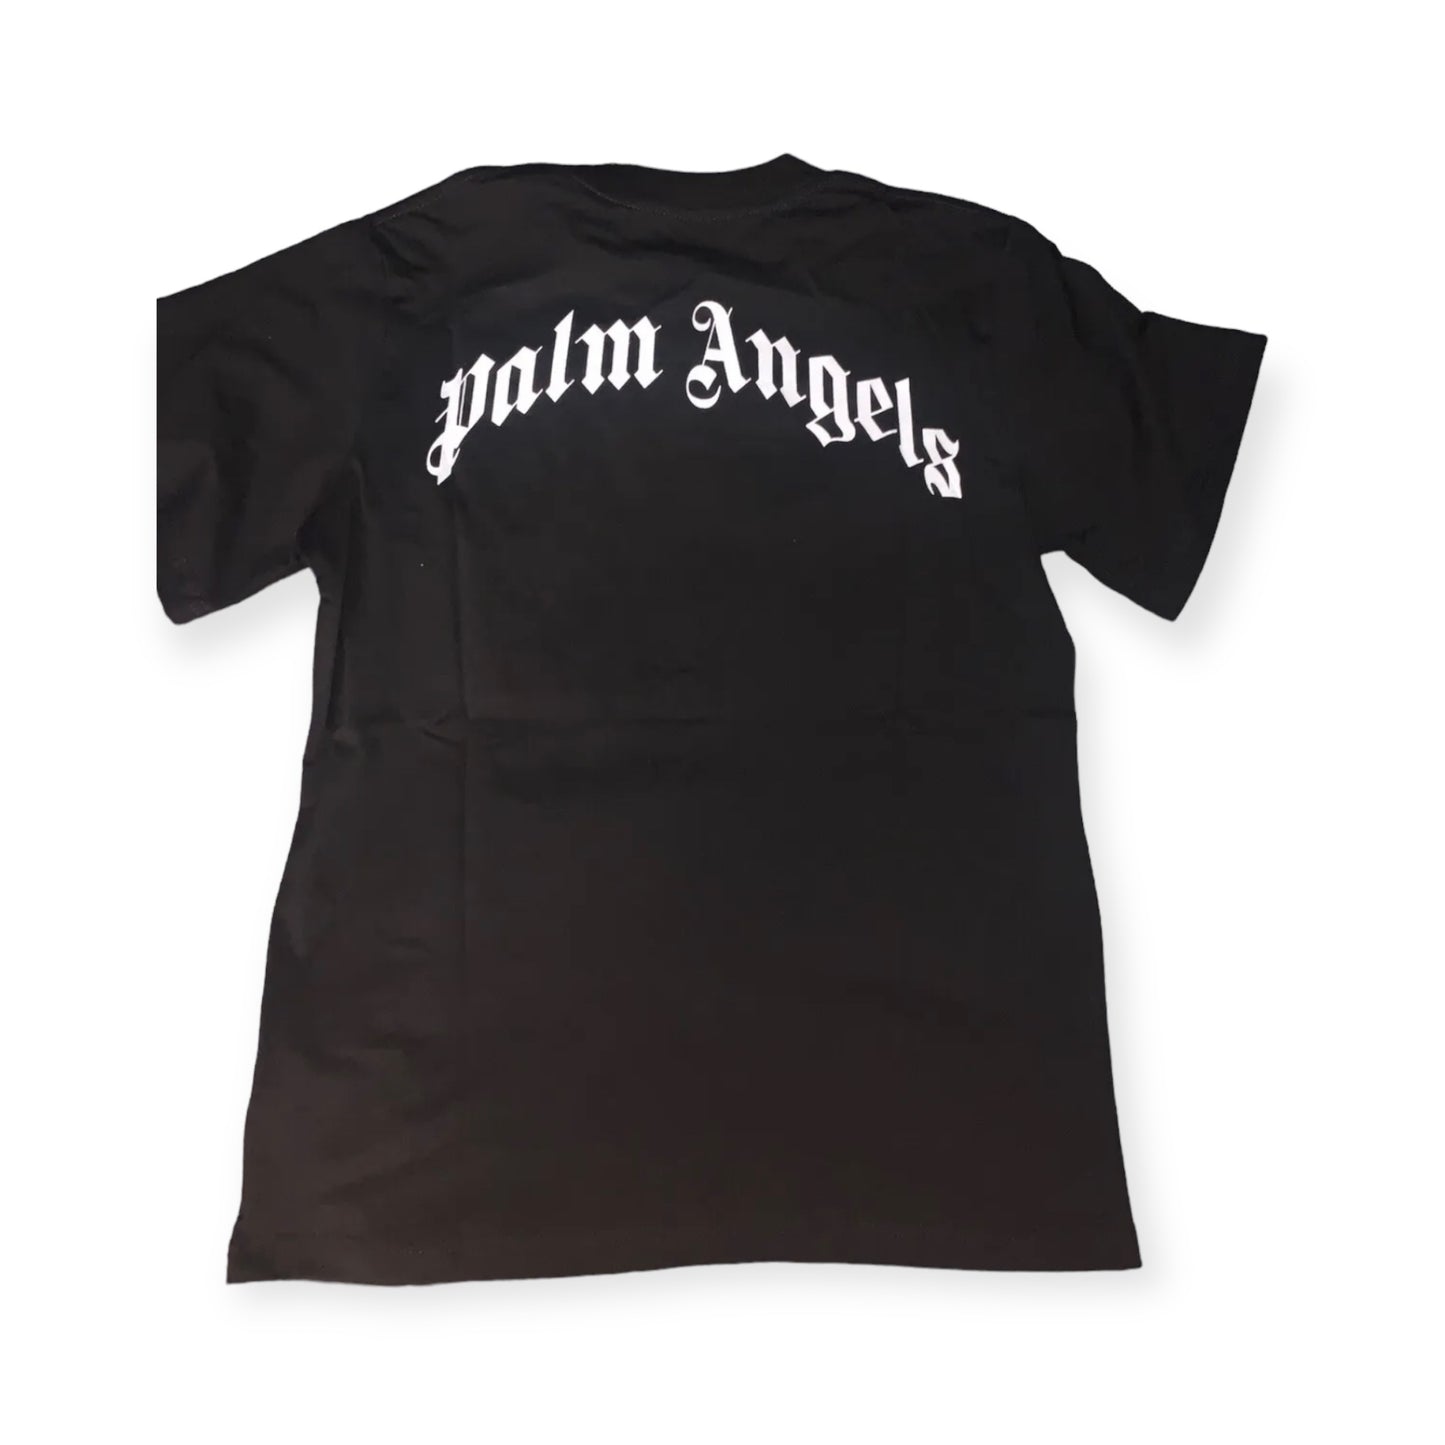 Brand New Palm Angels Tee Size M